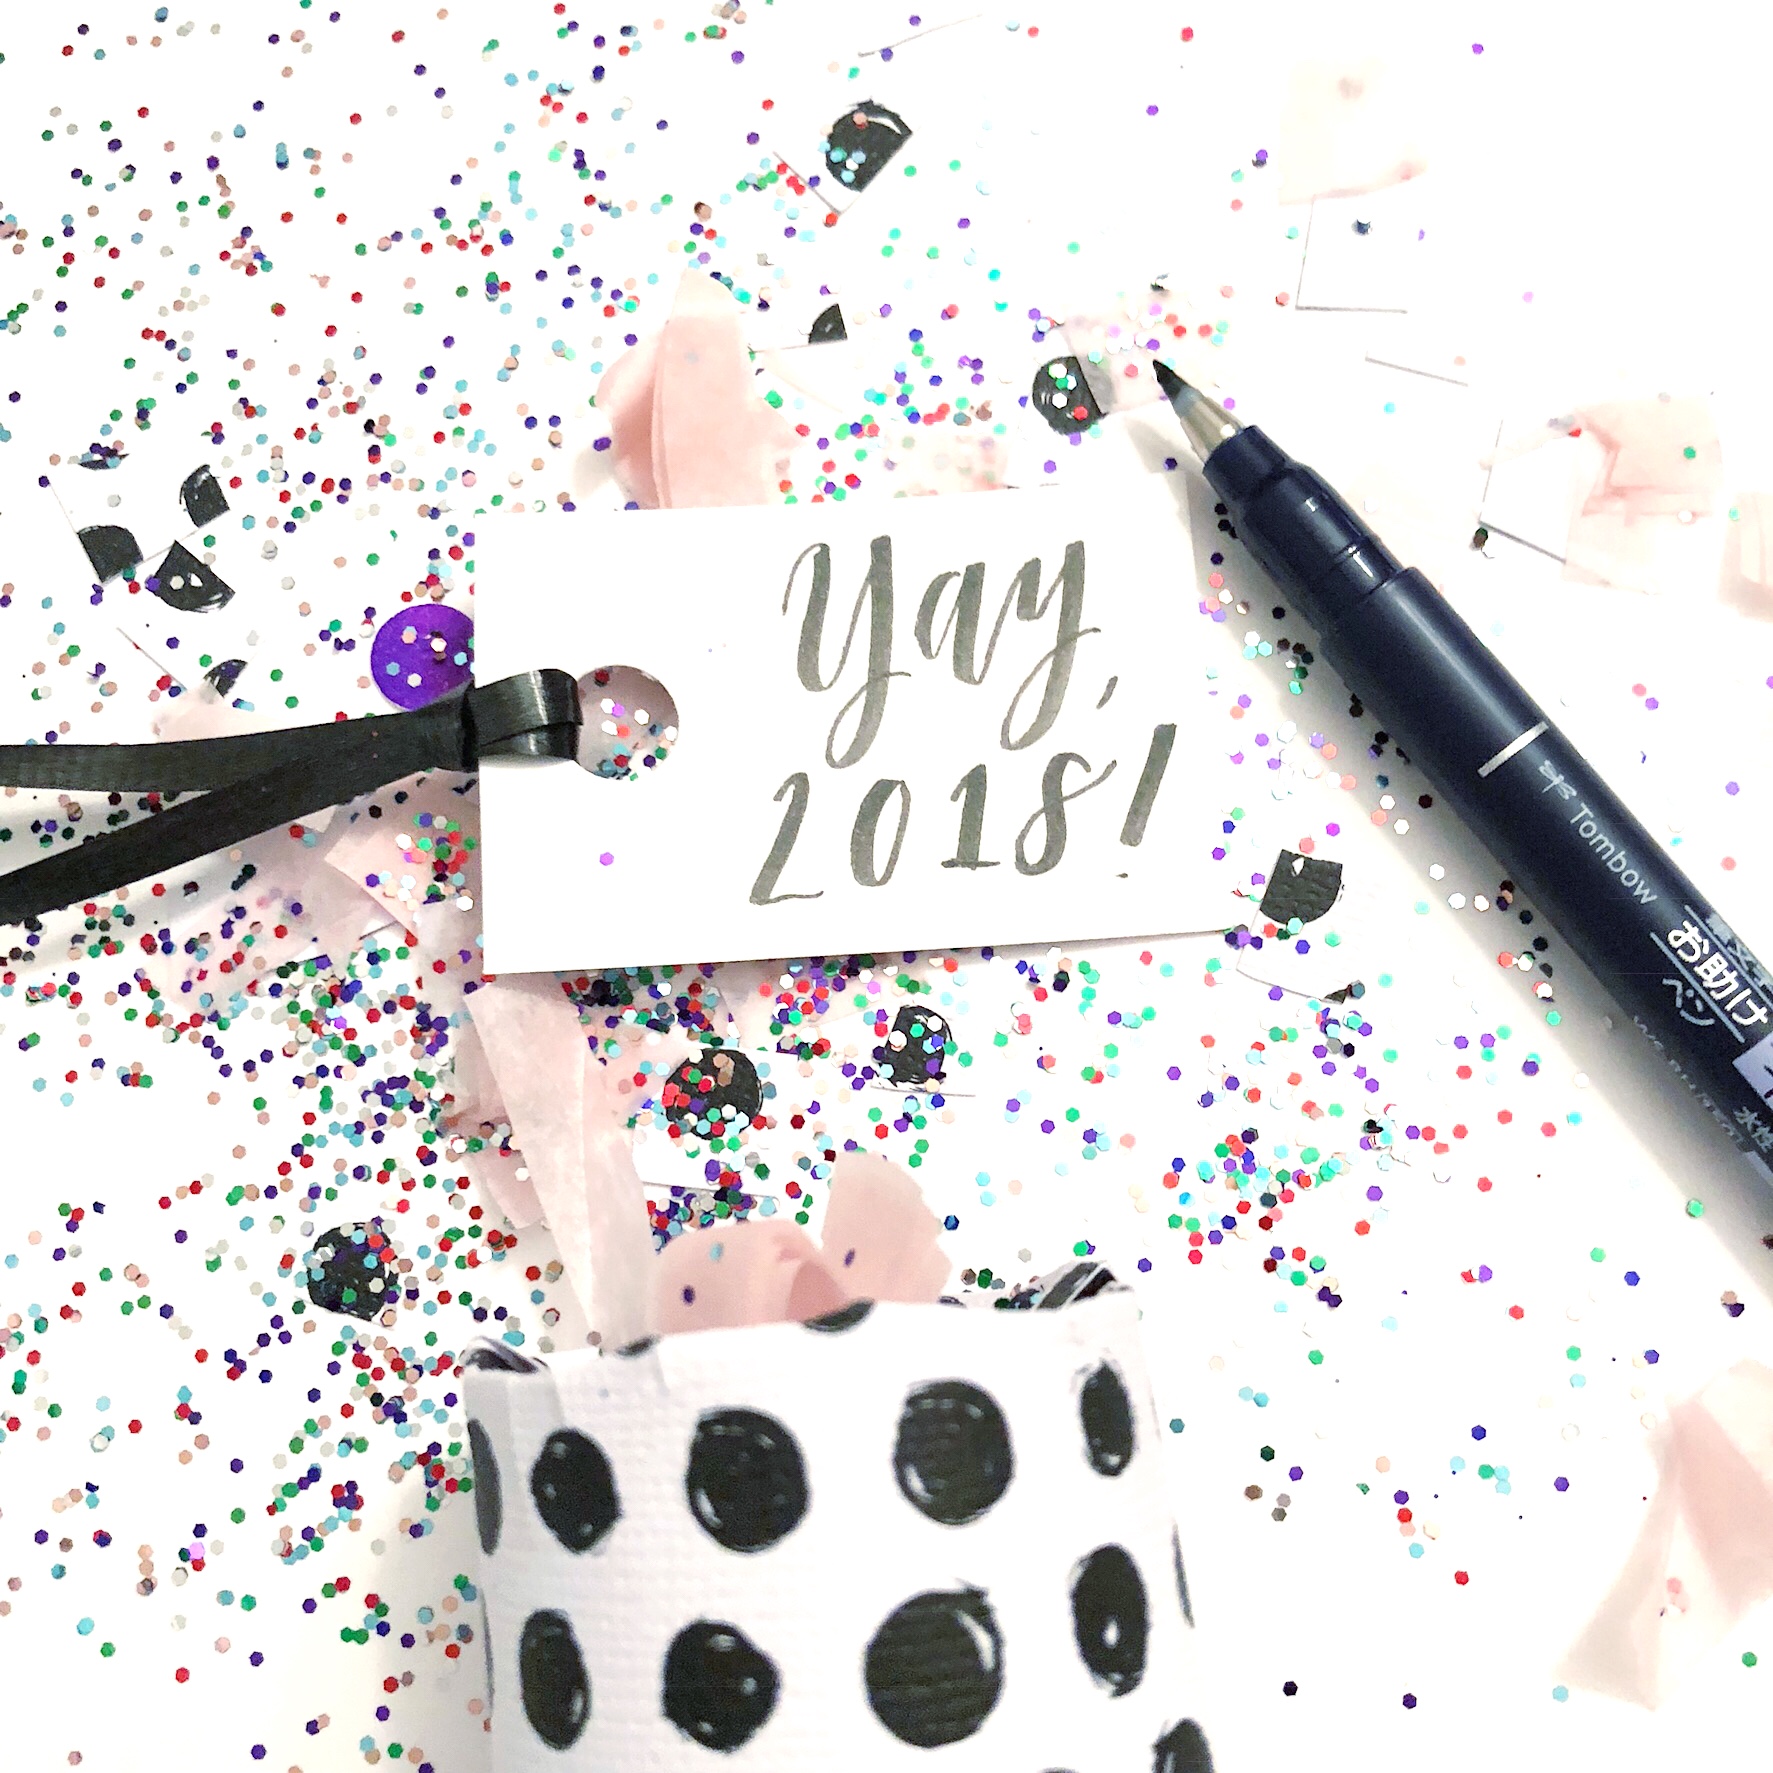 Lauren Fitzmaurice of @renmadecalligraphy takes you step by step through A Confetti Popper tutorial with her favorite tools from Tombow USA.com. For more lettering tips and tricks, check out her website at renmadecalligraphy.com.